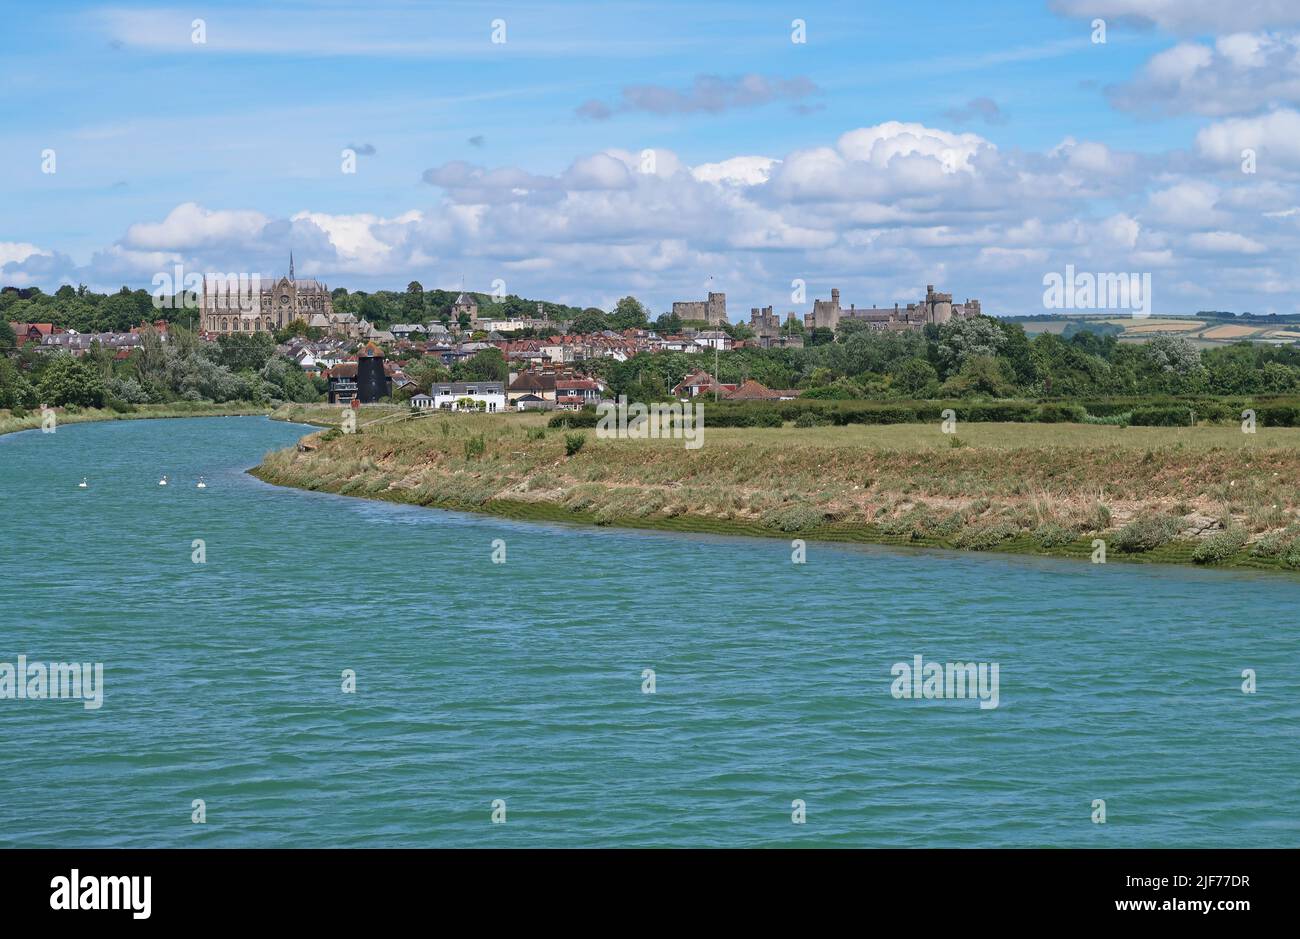 The River Arun in West Sussex, UK. View upstram at high tide showing Arundel Castle and cathedral in backround Stock Photo